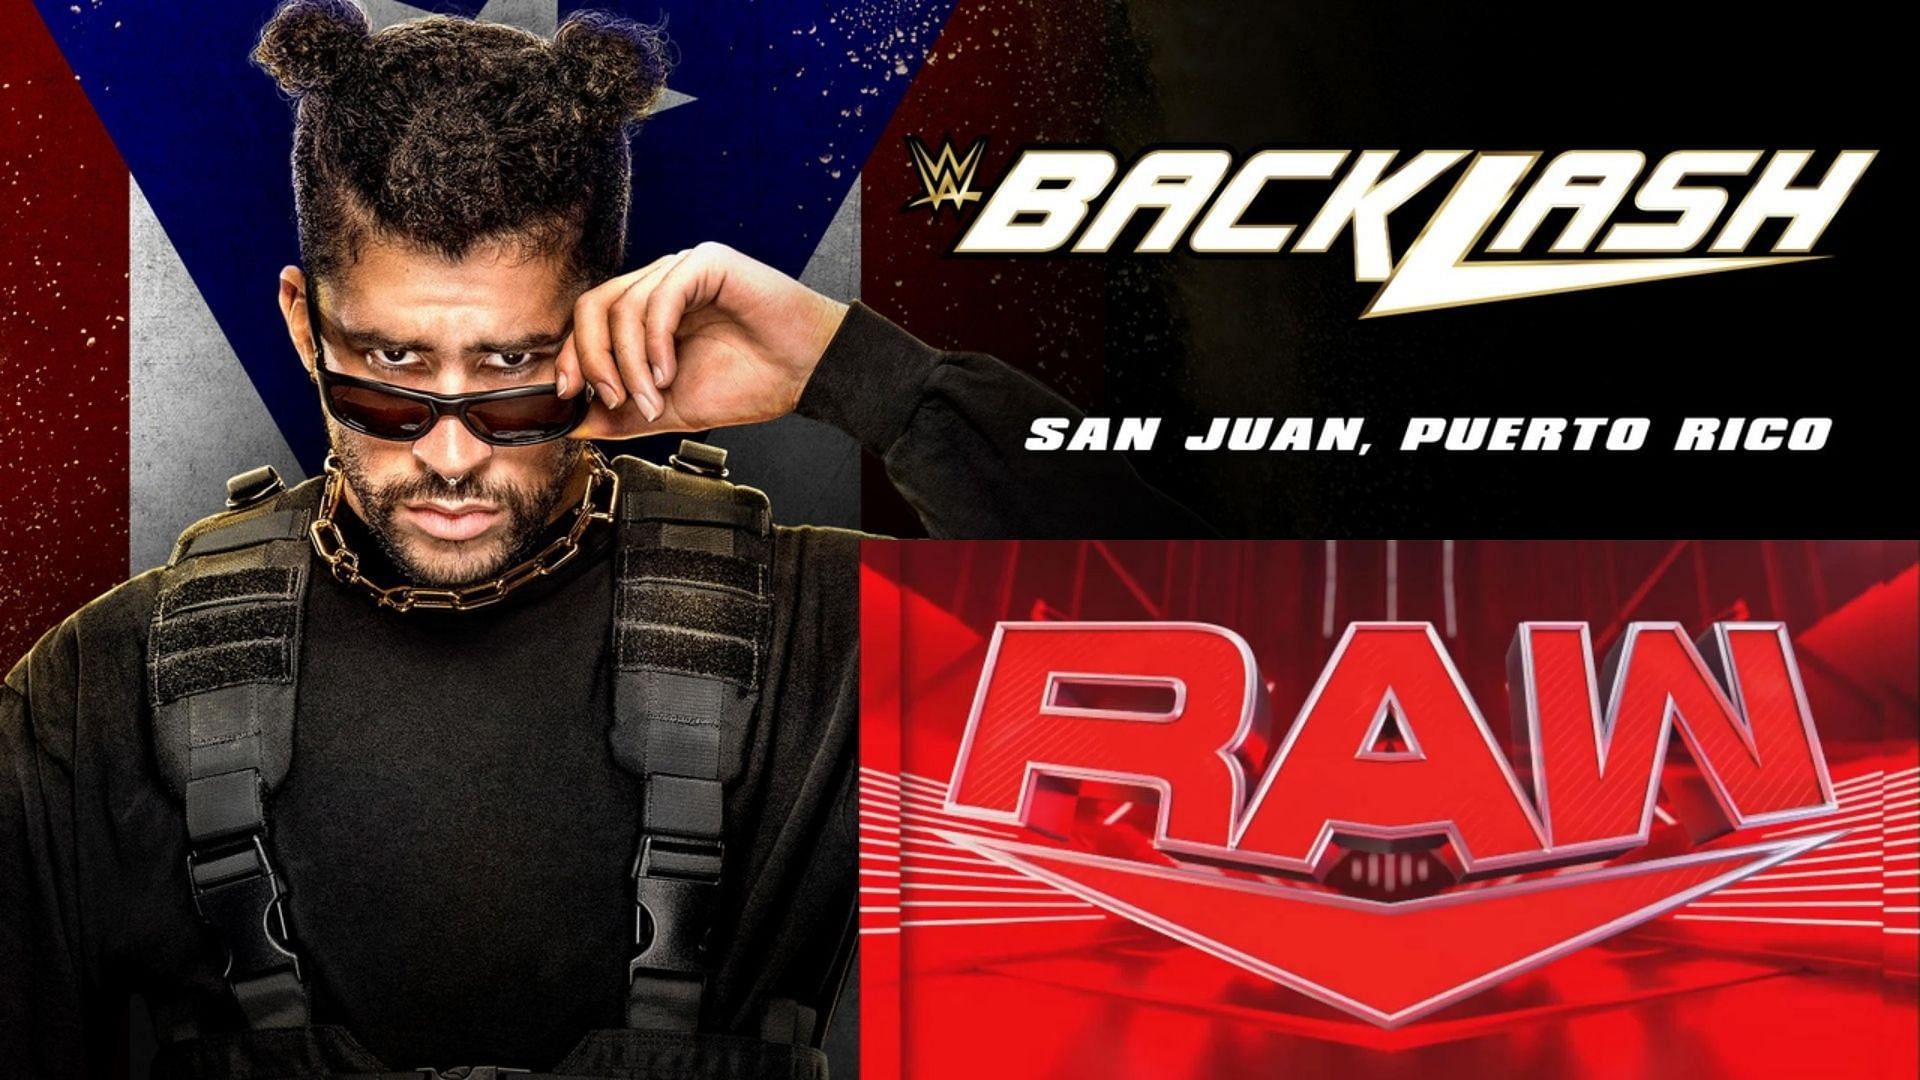 Backlash will take place on May 6th in Puerto Rico.